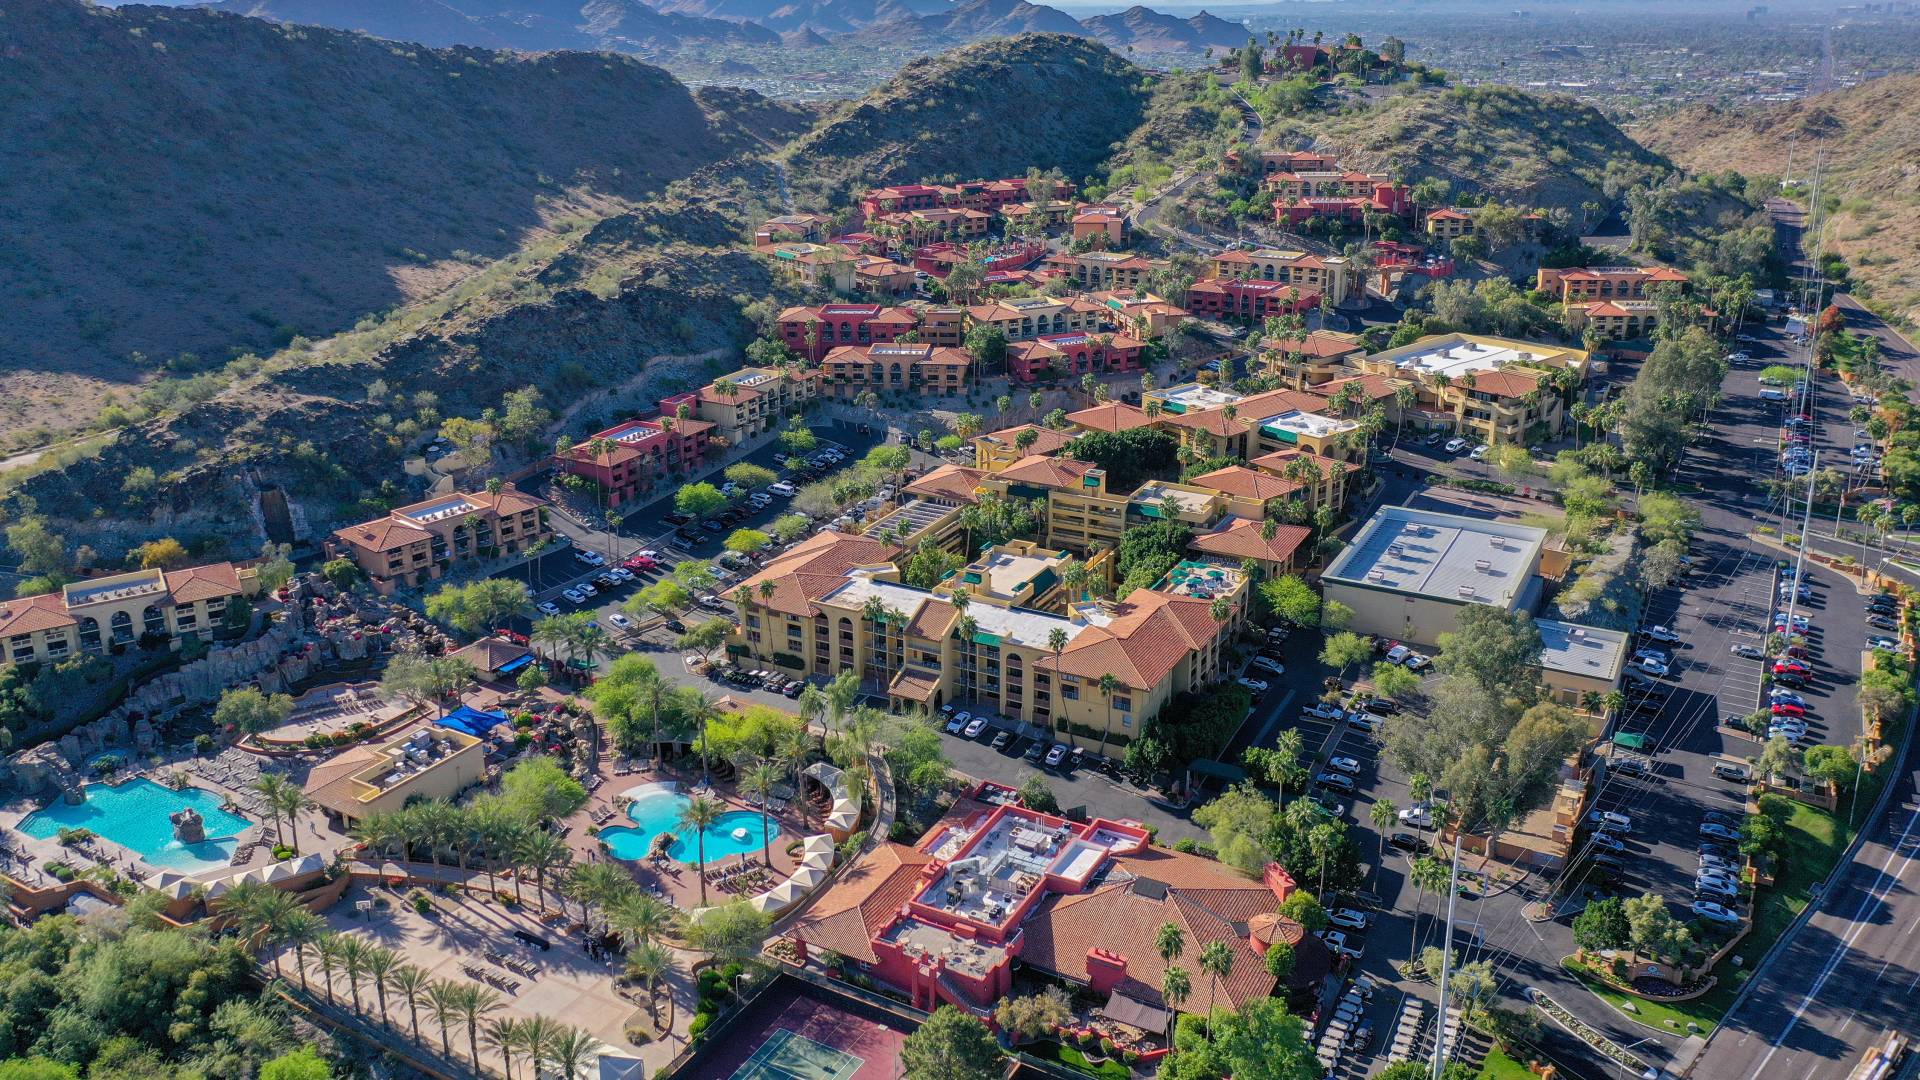 Aerial View of hotel, pools and mountains